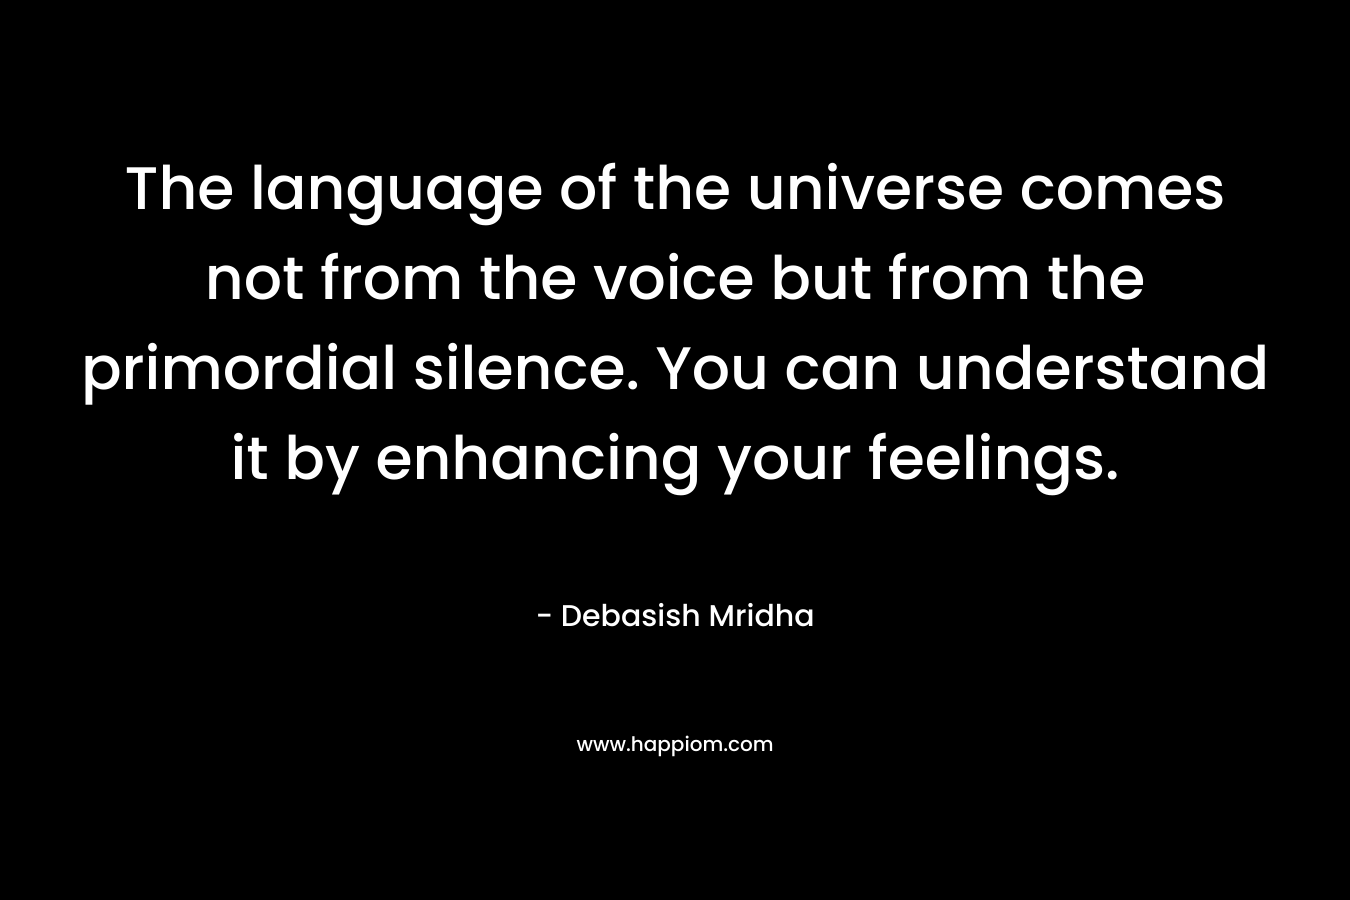 The language of the universe comes not from the voice but from the primordial silence. You can understand it by enhancing your feelings.